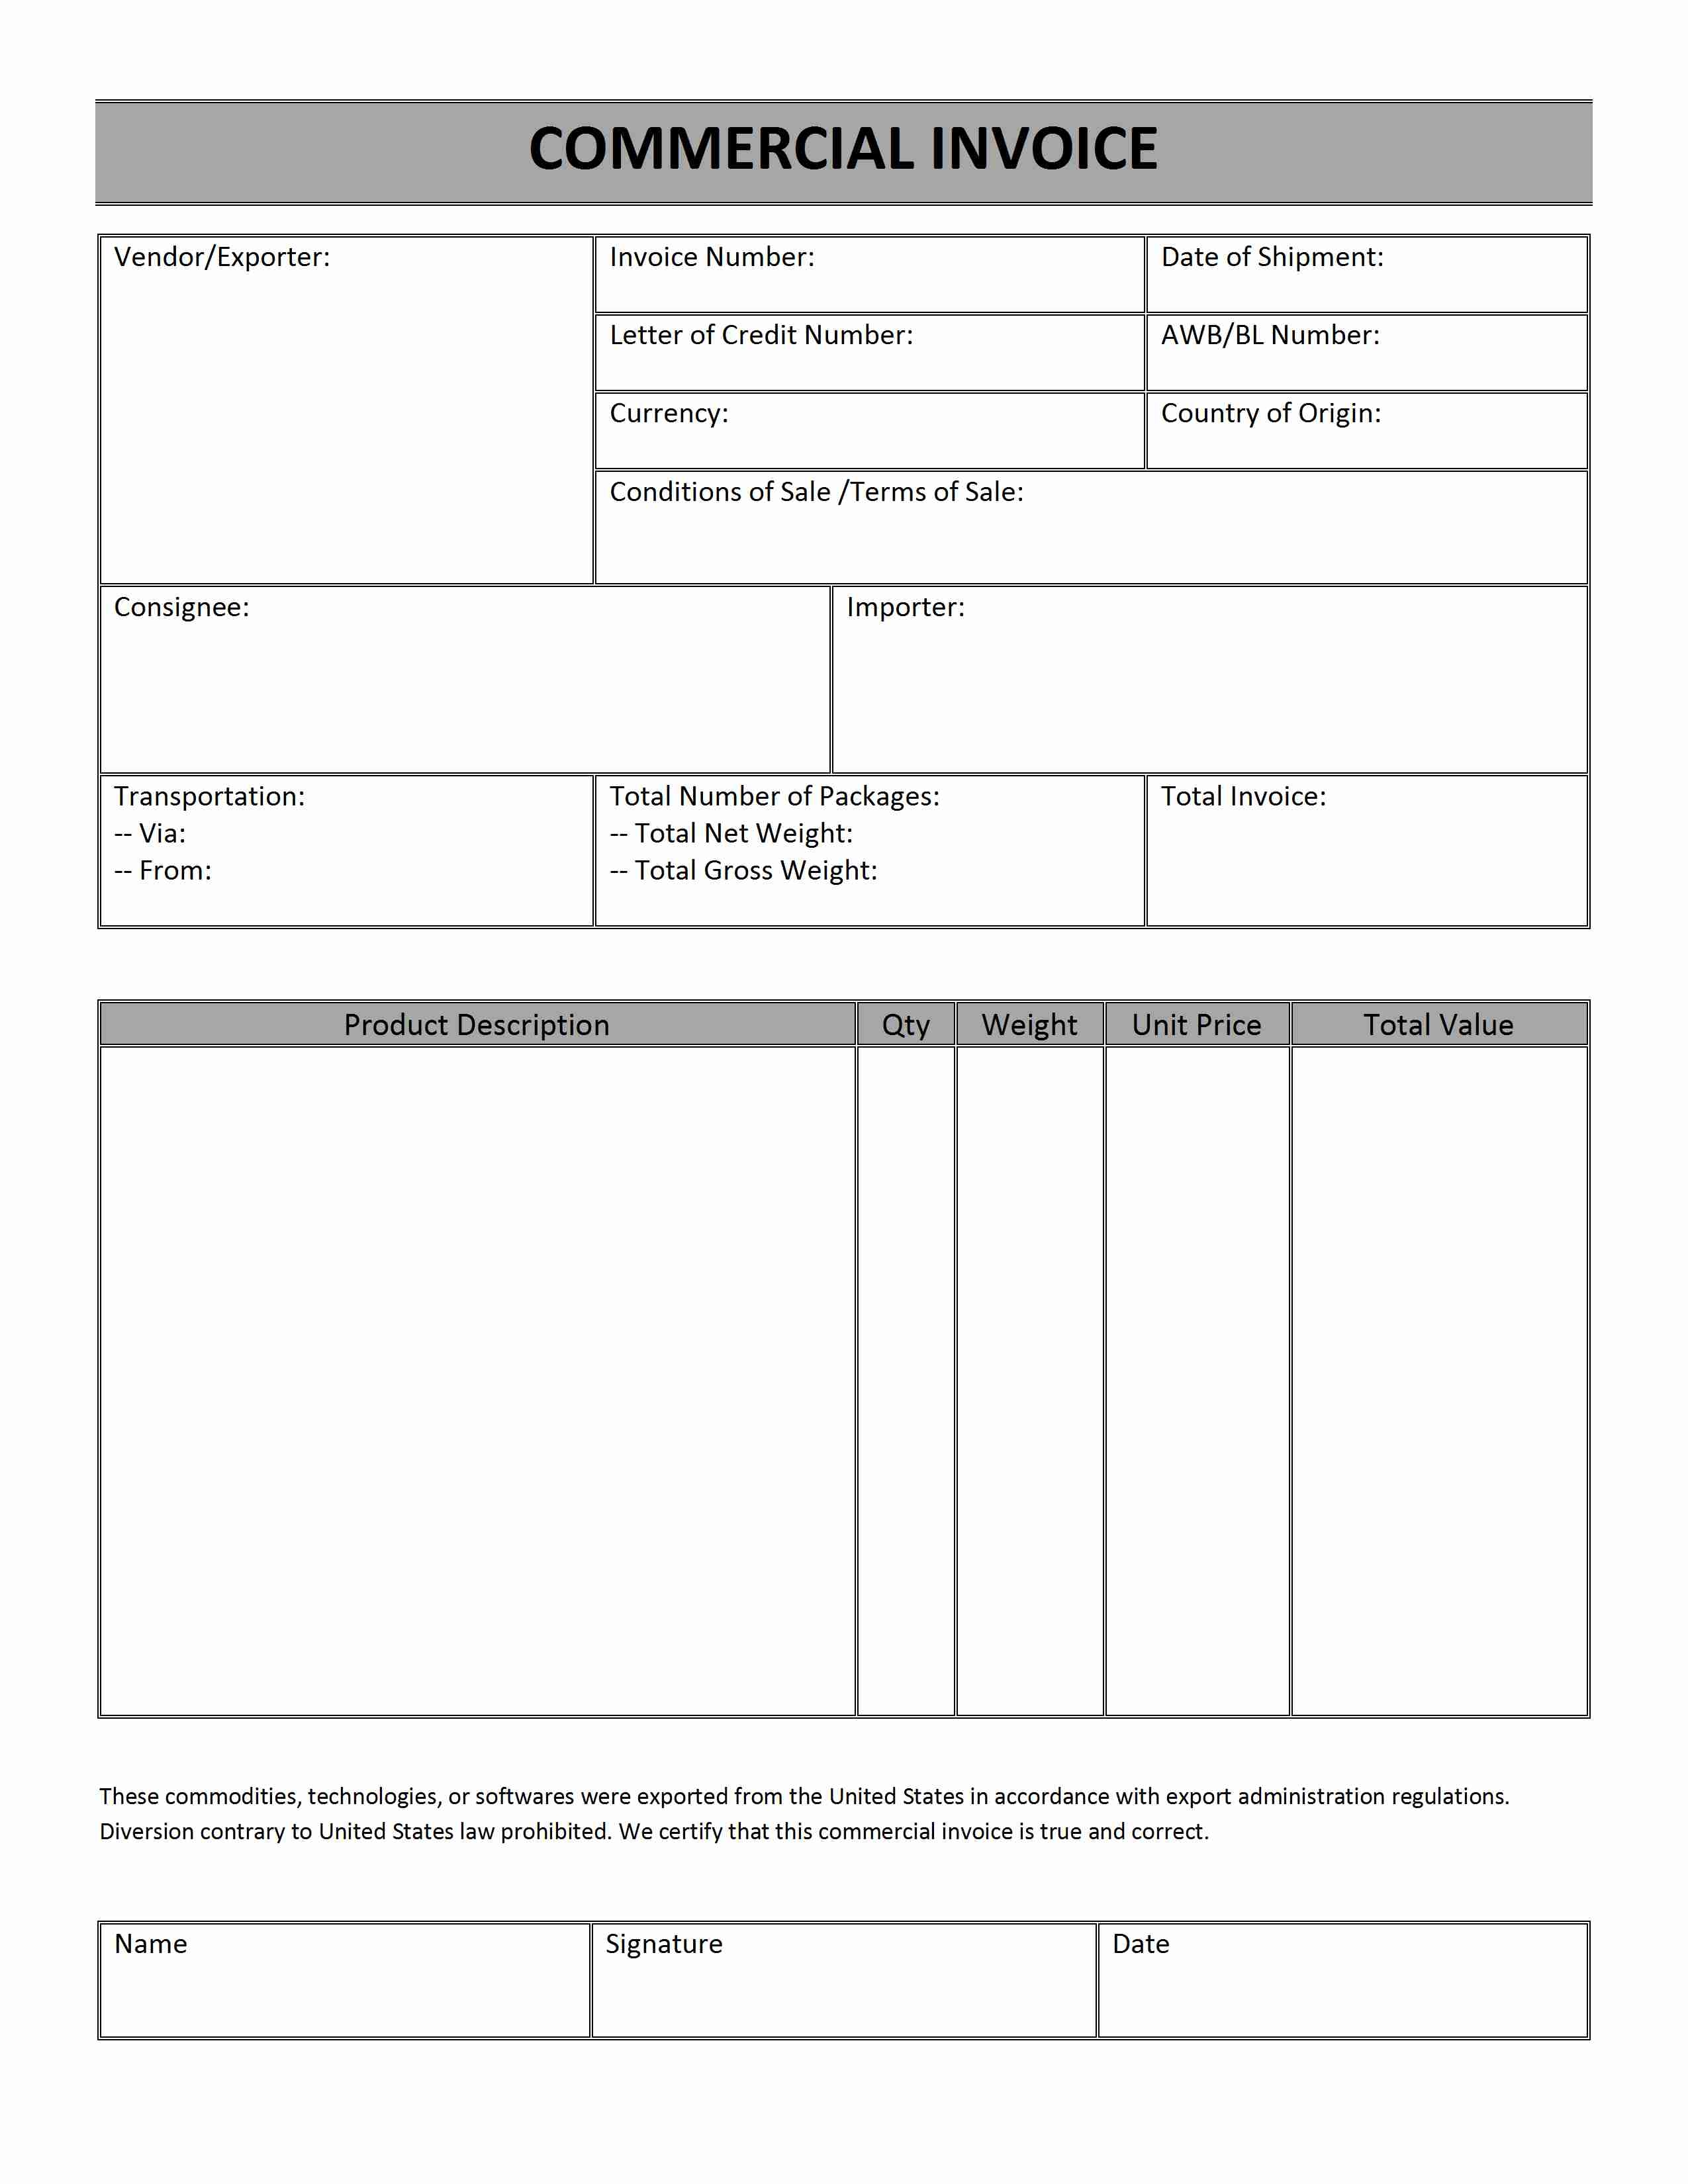 commercial invoice format commercial invoice template word proforma commercial invoice